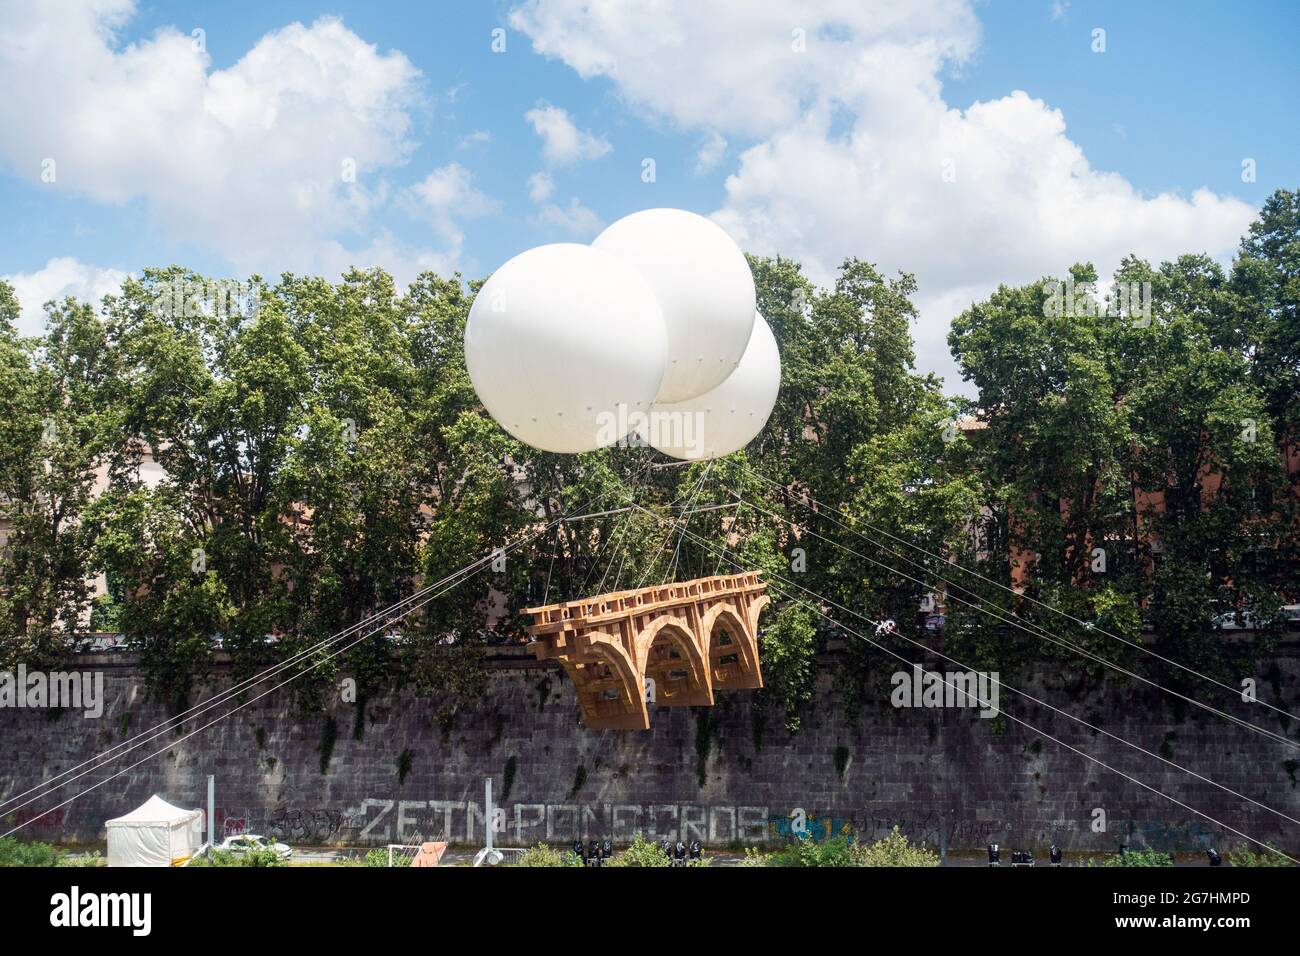 Olivier Grossetete, Suspended Bridge, a temporary  art installation over the Tiber River in Rome, all made of paper Stock Photo